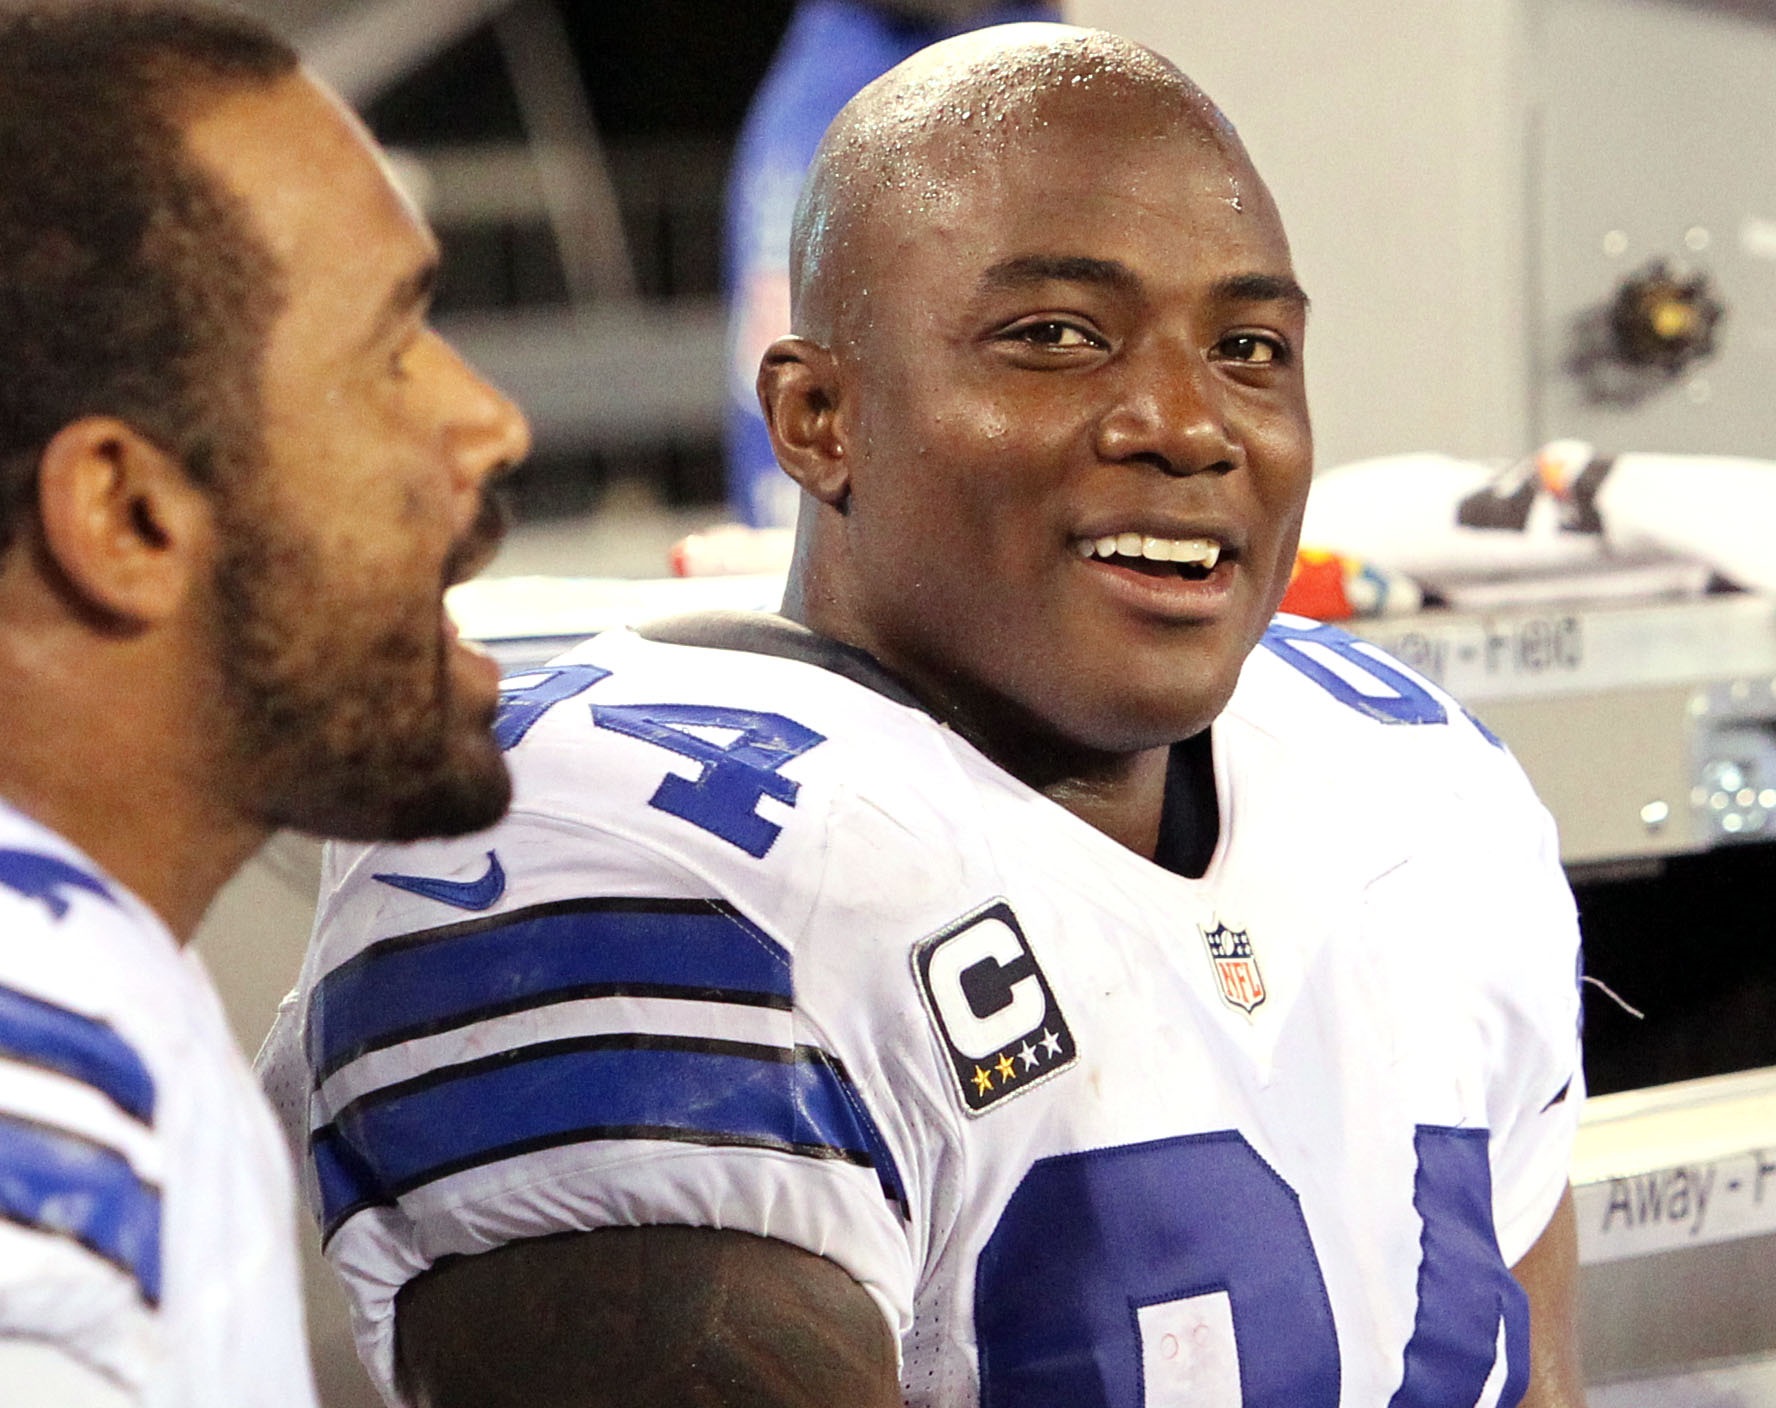 DeMarcus Ware, Darren Woodson among 2022 Hall of Fame semifinalists, Romo  out